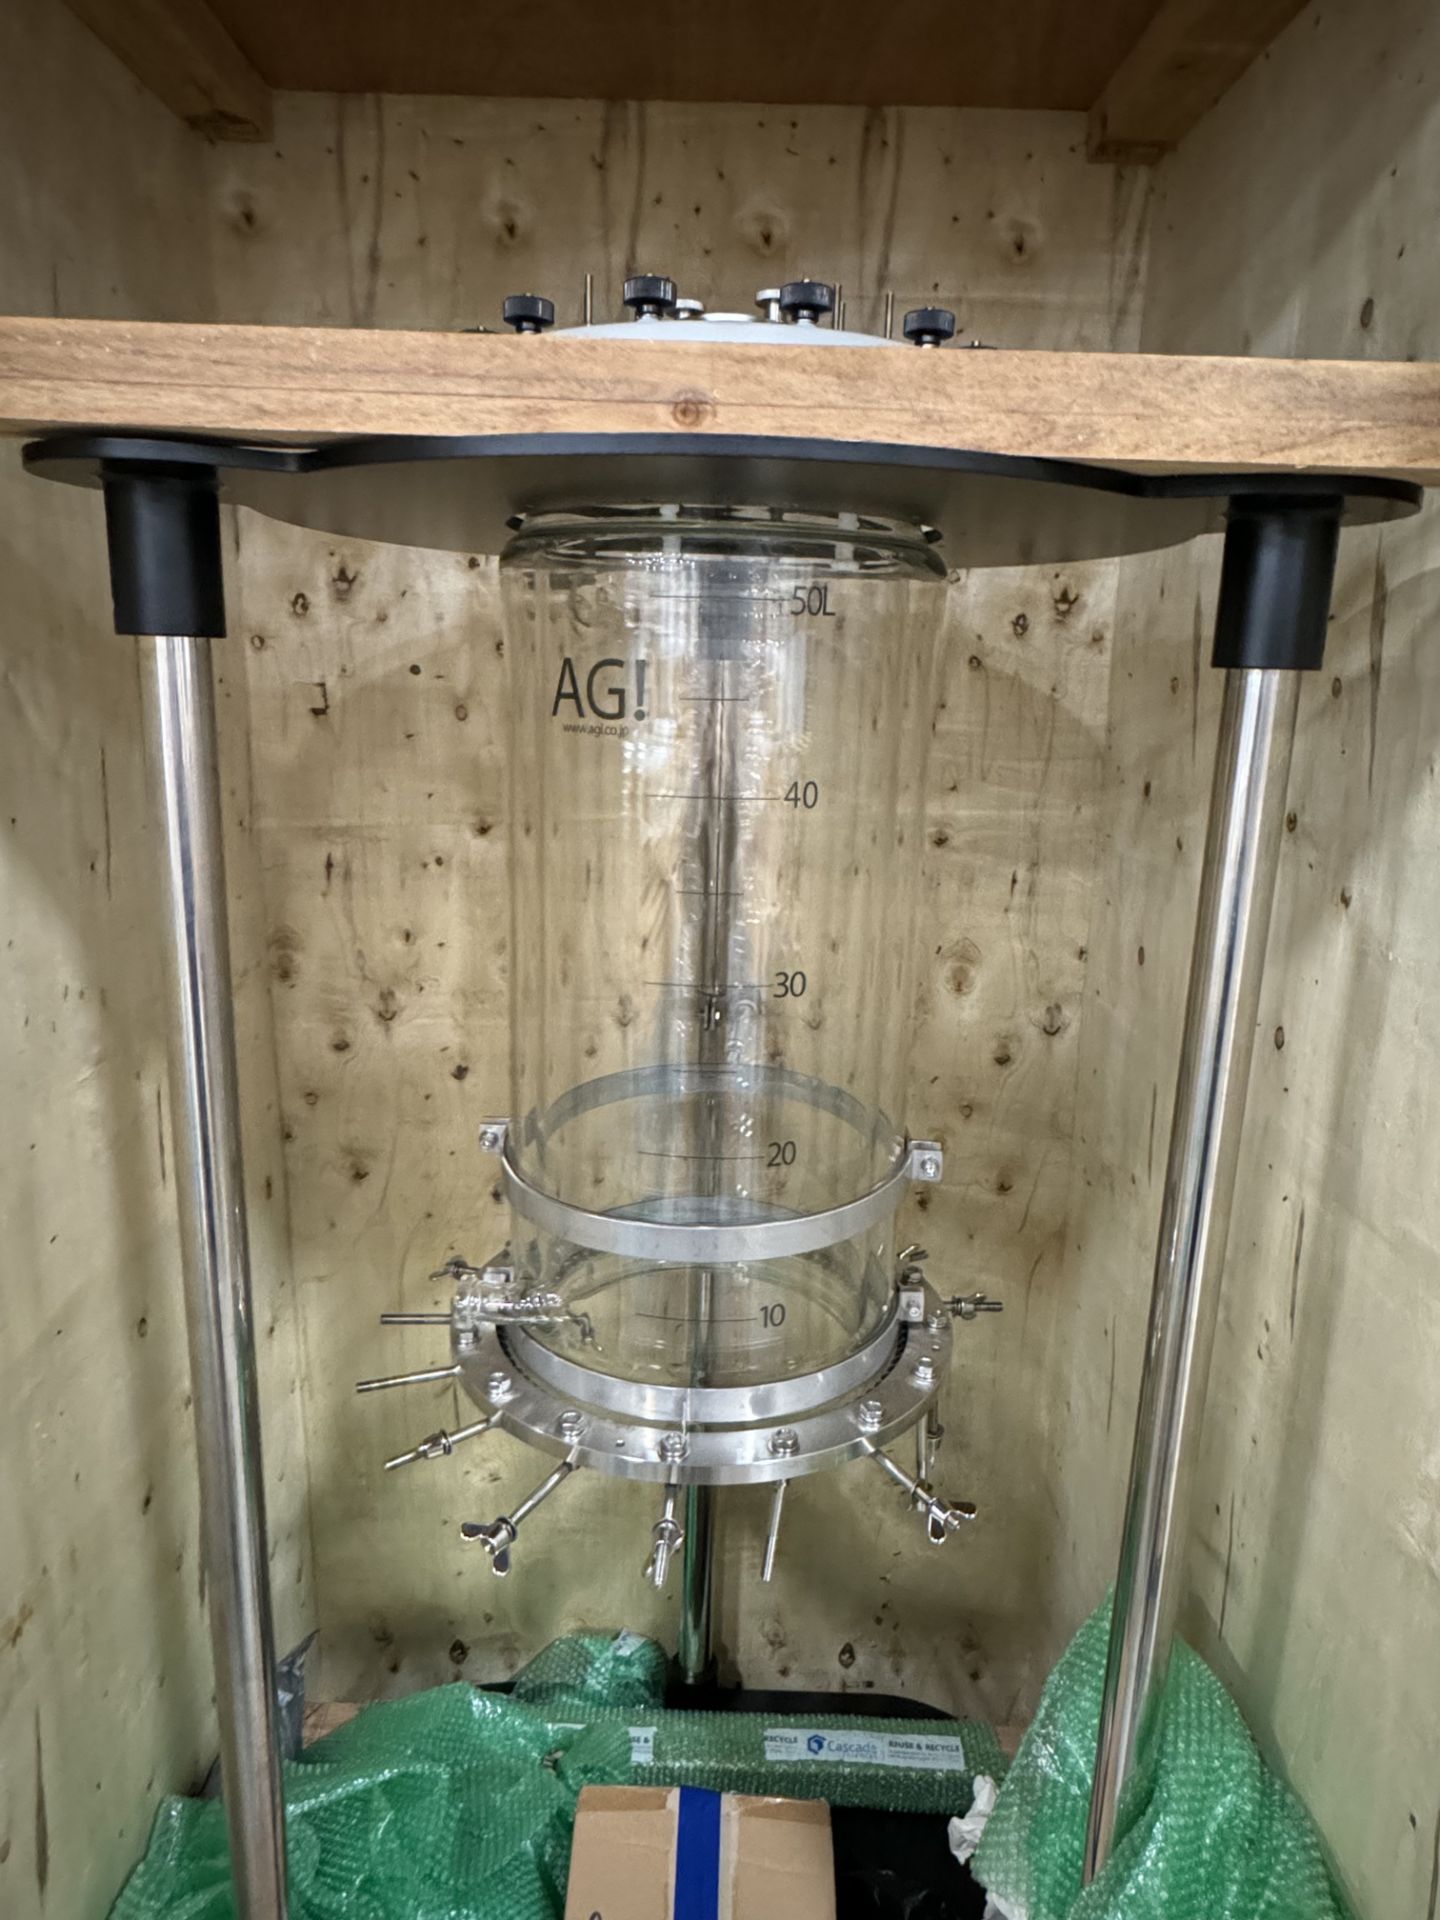 New/Unused 50 L Glass Filter Reactor System w/ Mobile Cart. Model CDR-50.